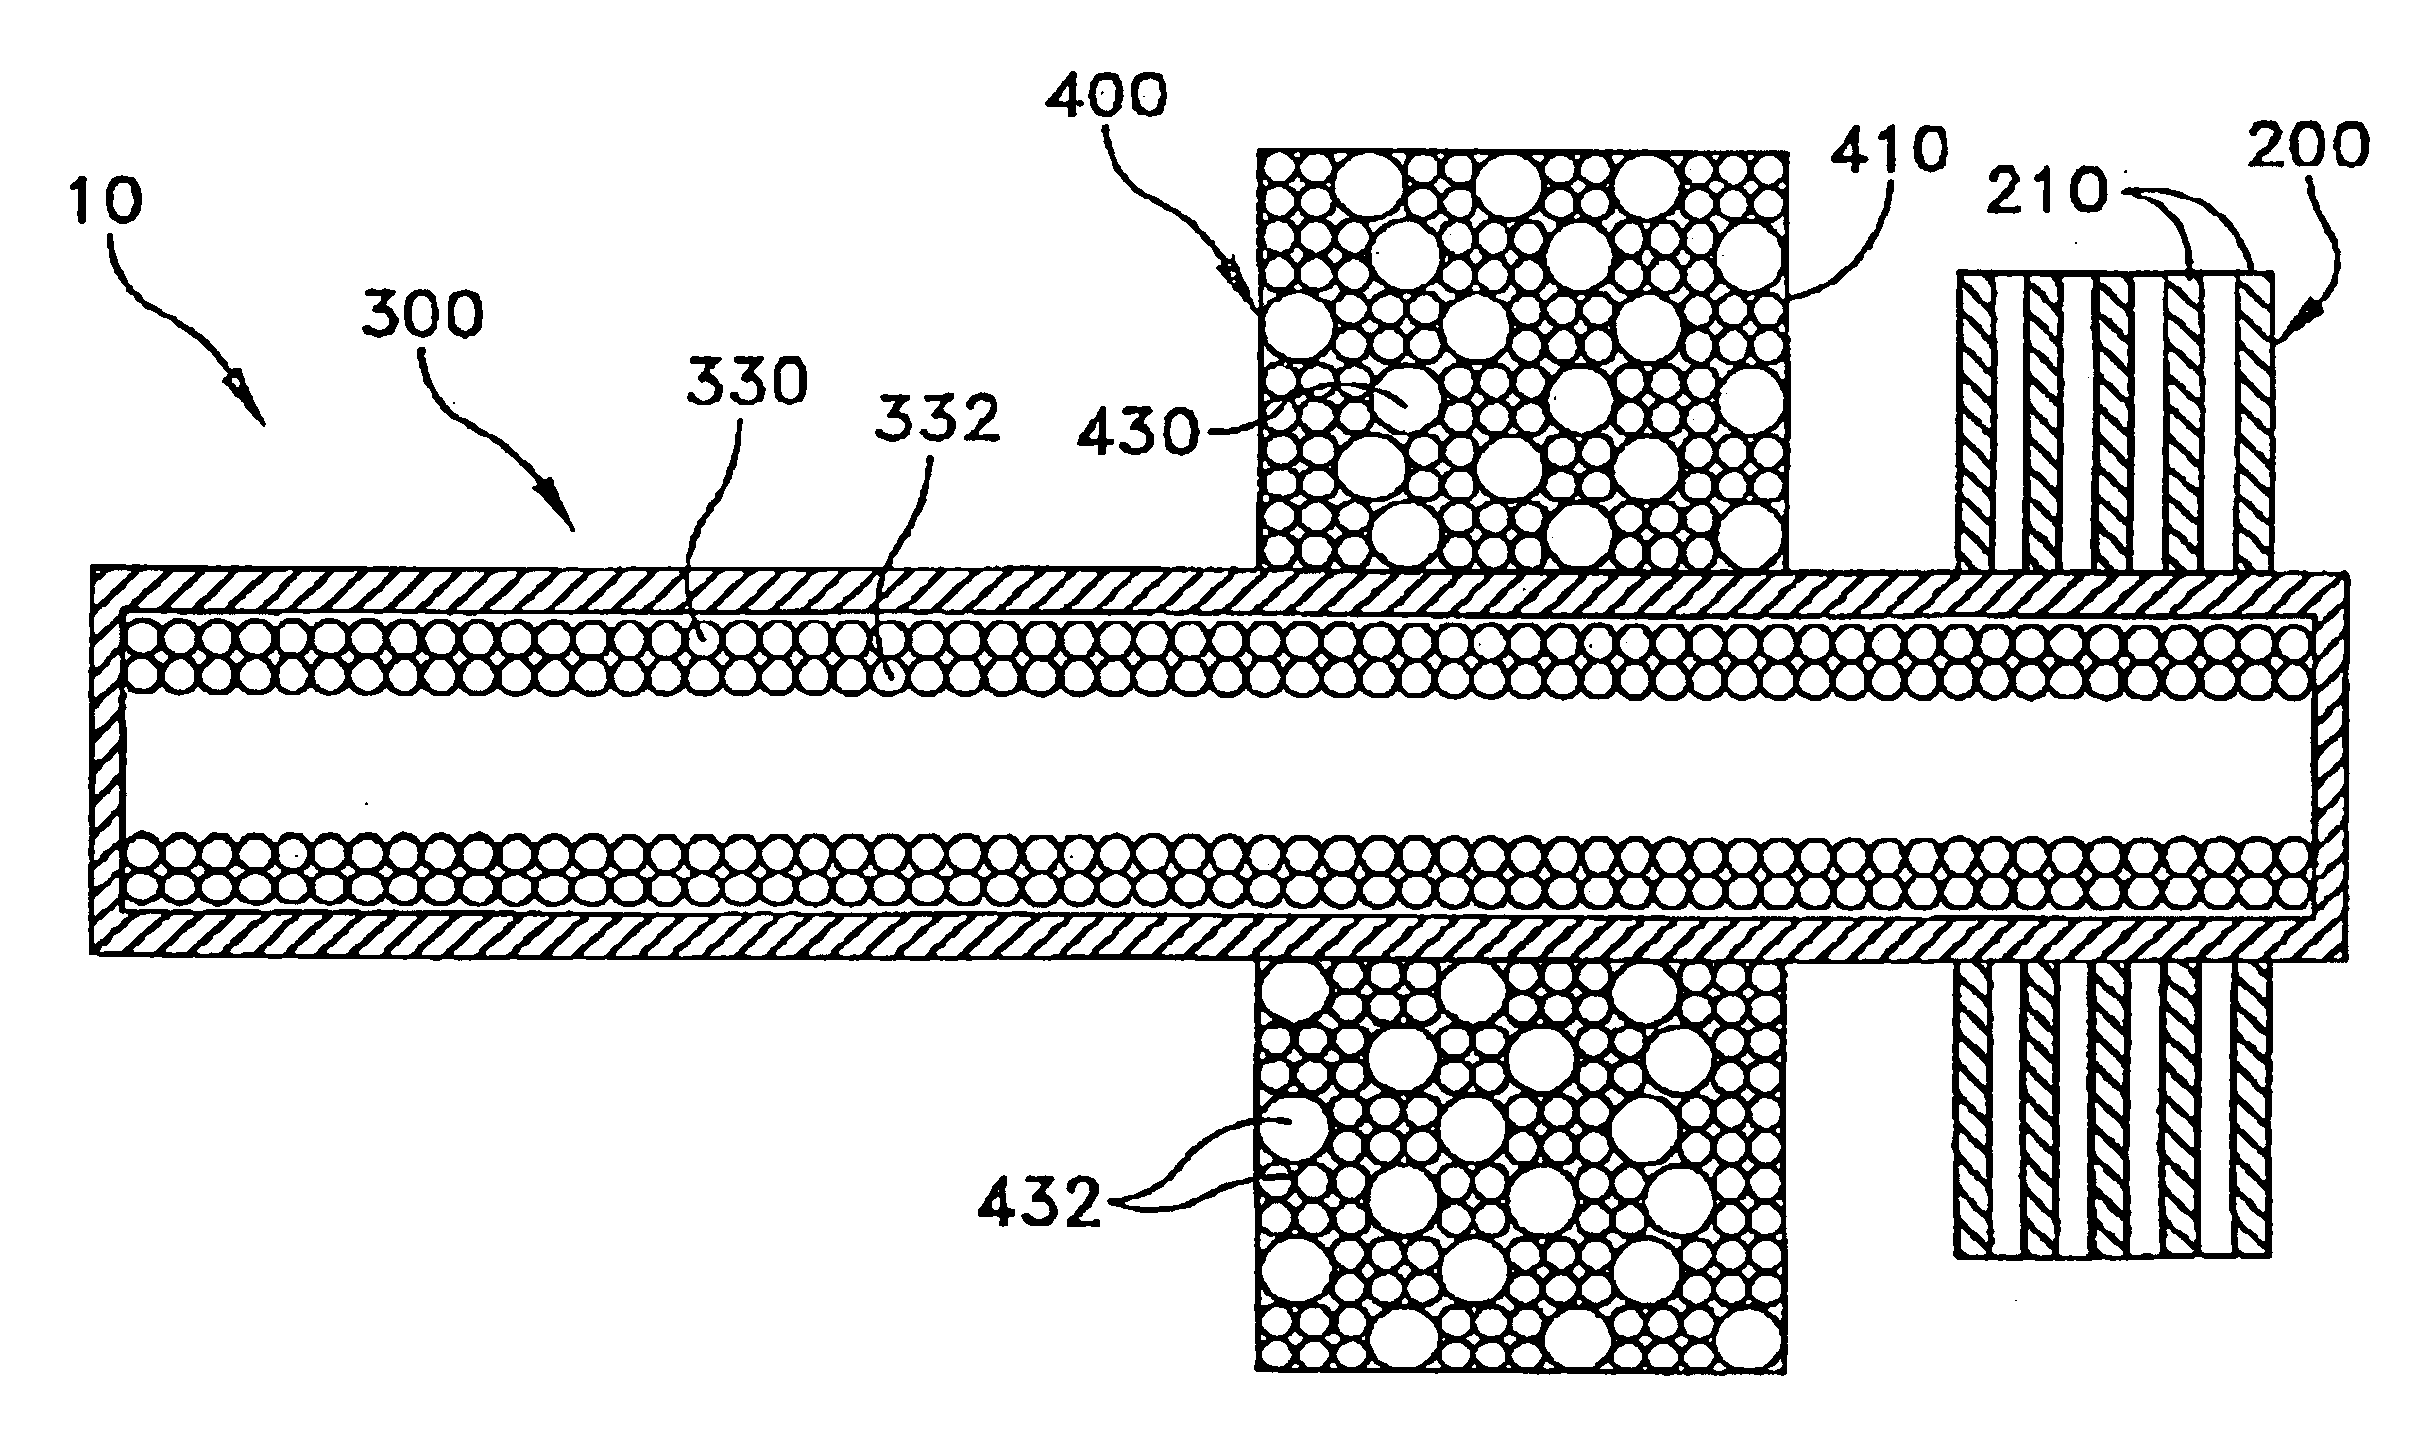 Heat pipe having a wick structure containing phase change materials